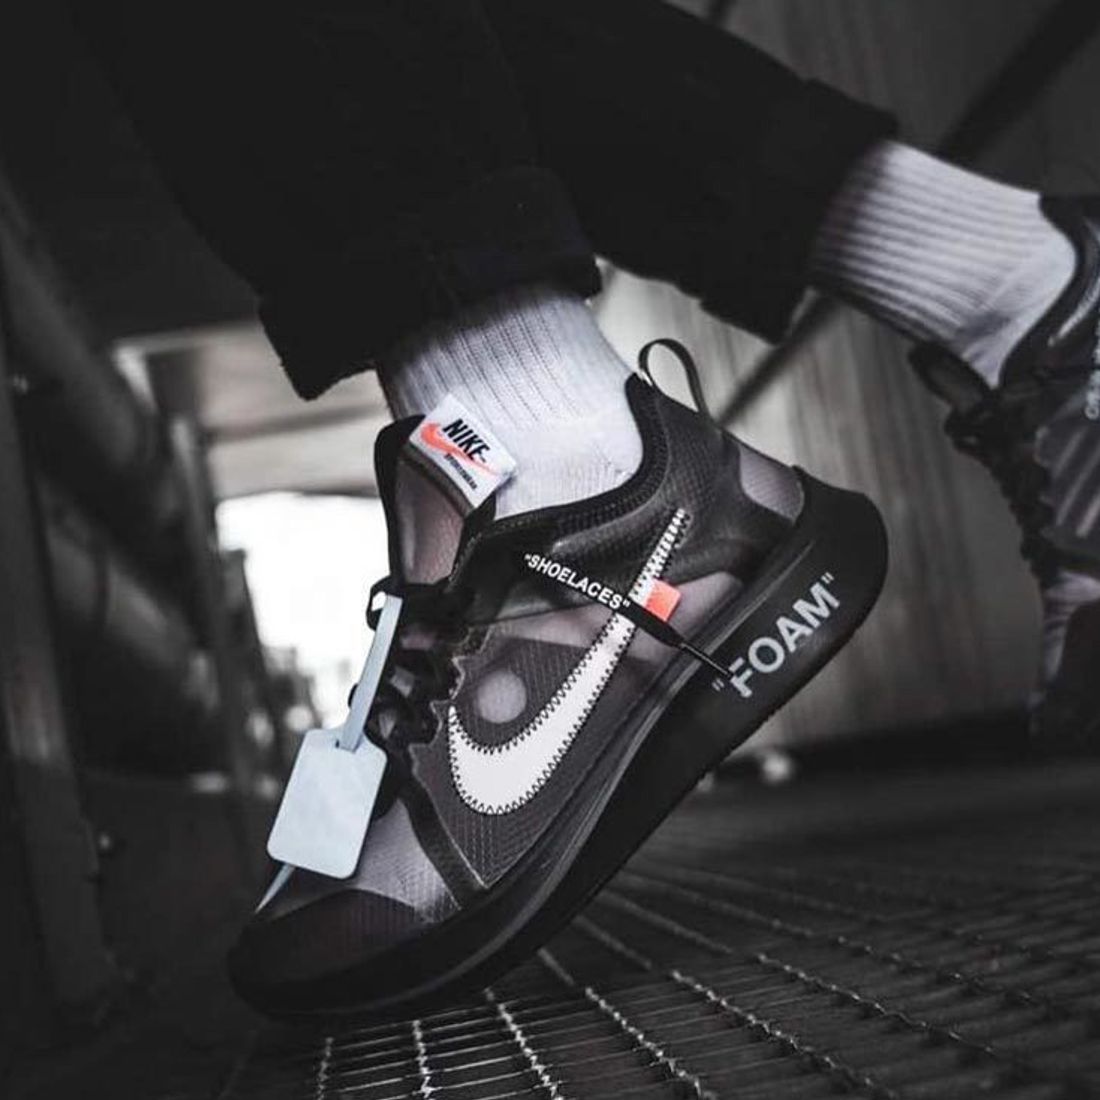 Thoughts and styling tips on OFF WHITE x Nike Air Force 1? http